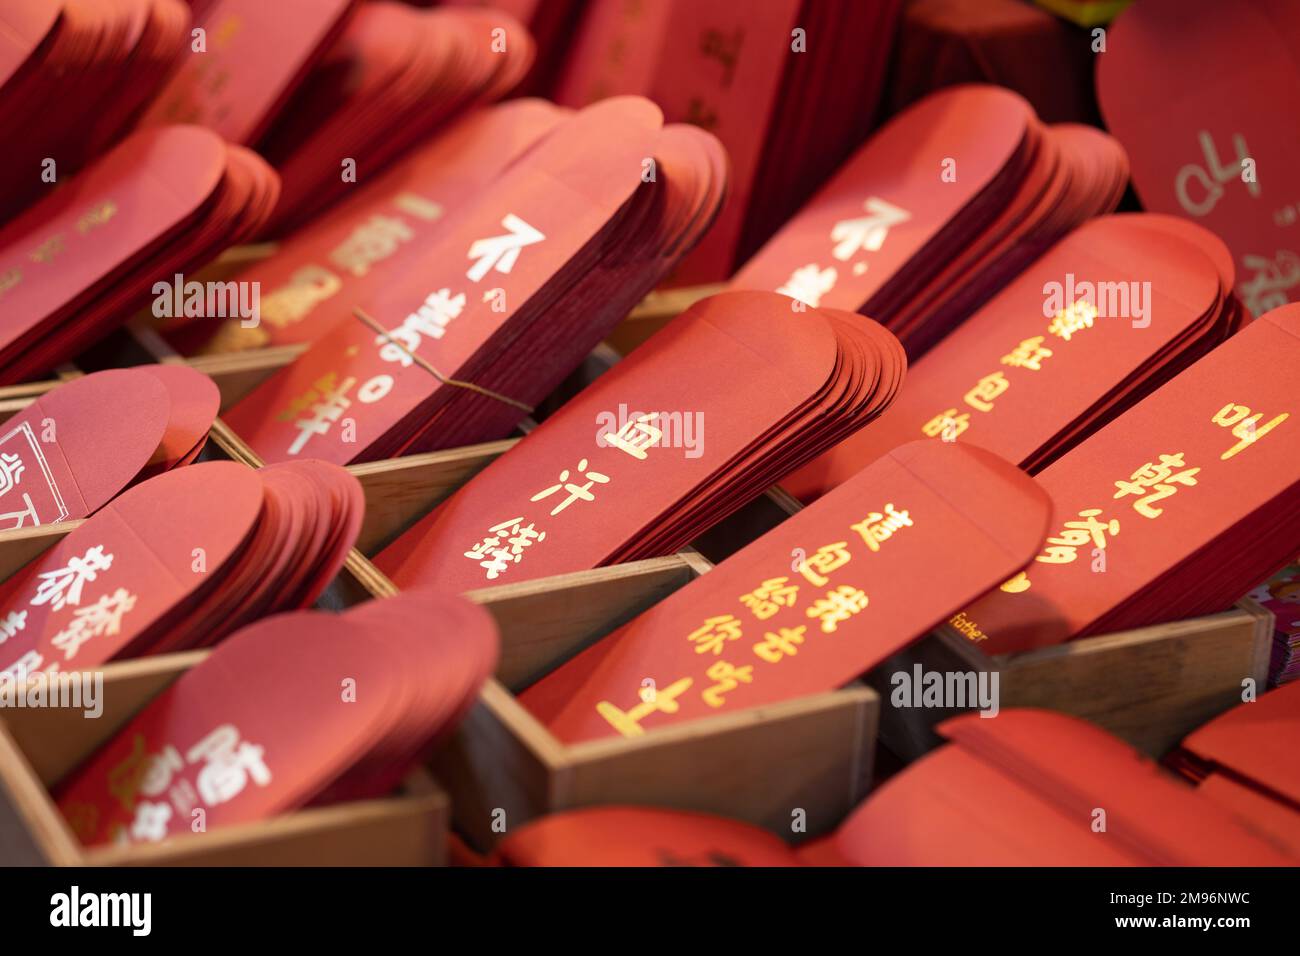 Red envelopes for money gifts are for sale at the Dihua Street New Year's market in Taipei ahead of the Lunar New Year and the Year of the Rabbit. Stock Photo